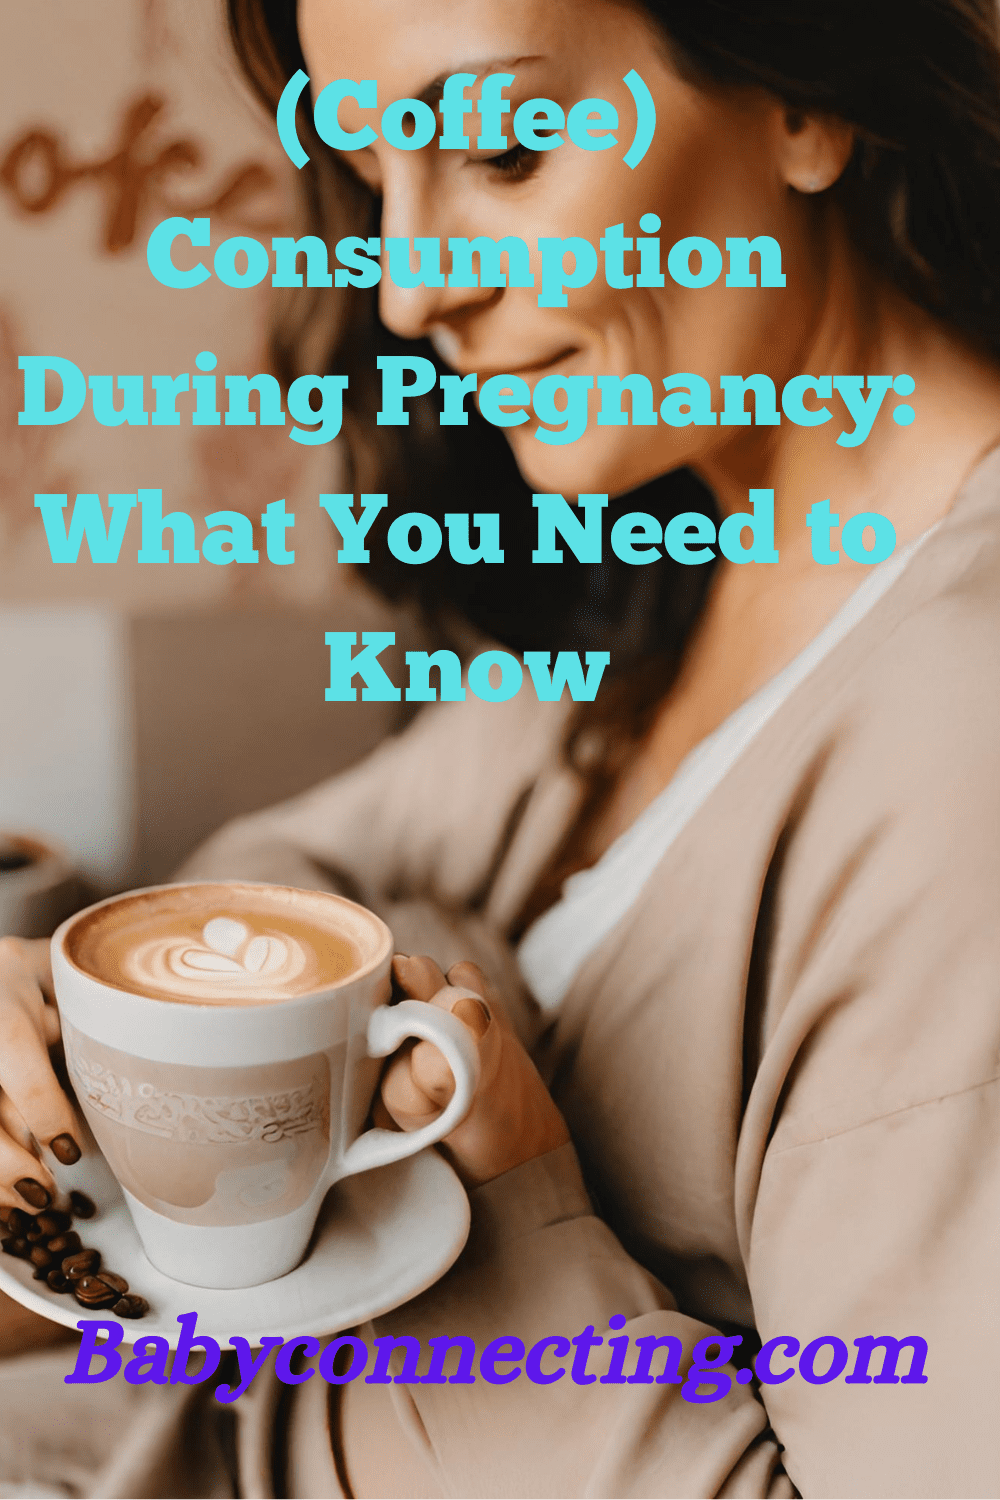 (Coffee) Consumption During Pregnancy: What You Need